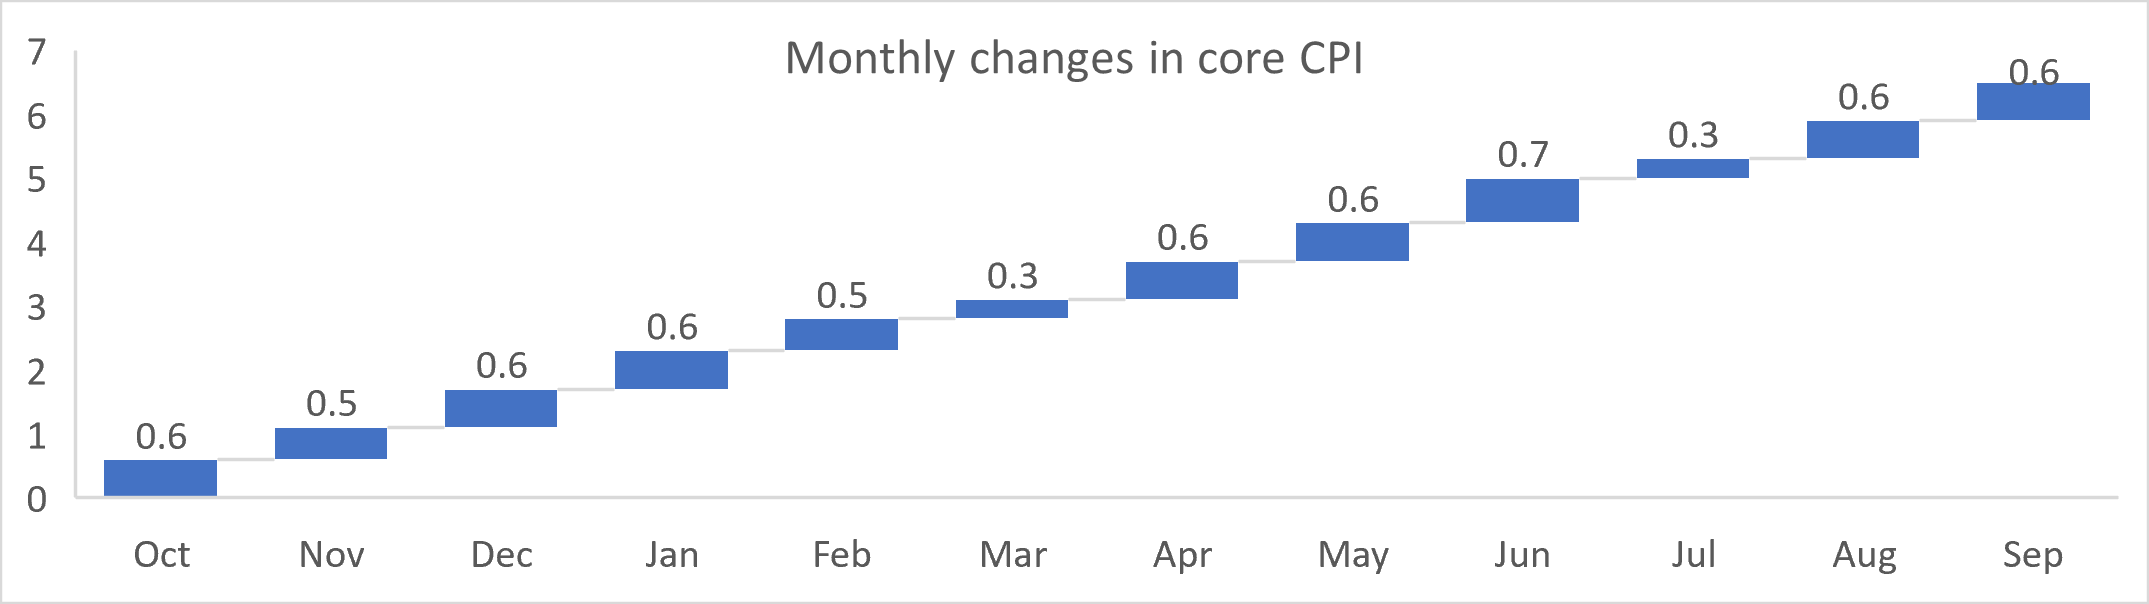 Monthly change in core CPI